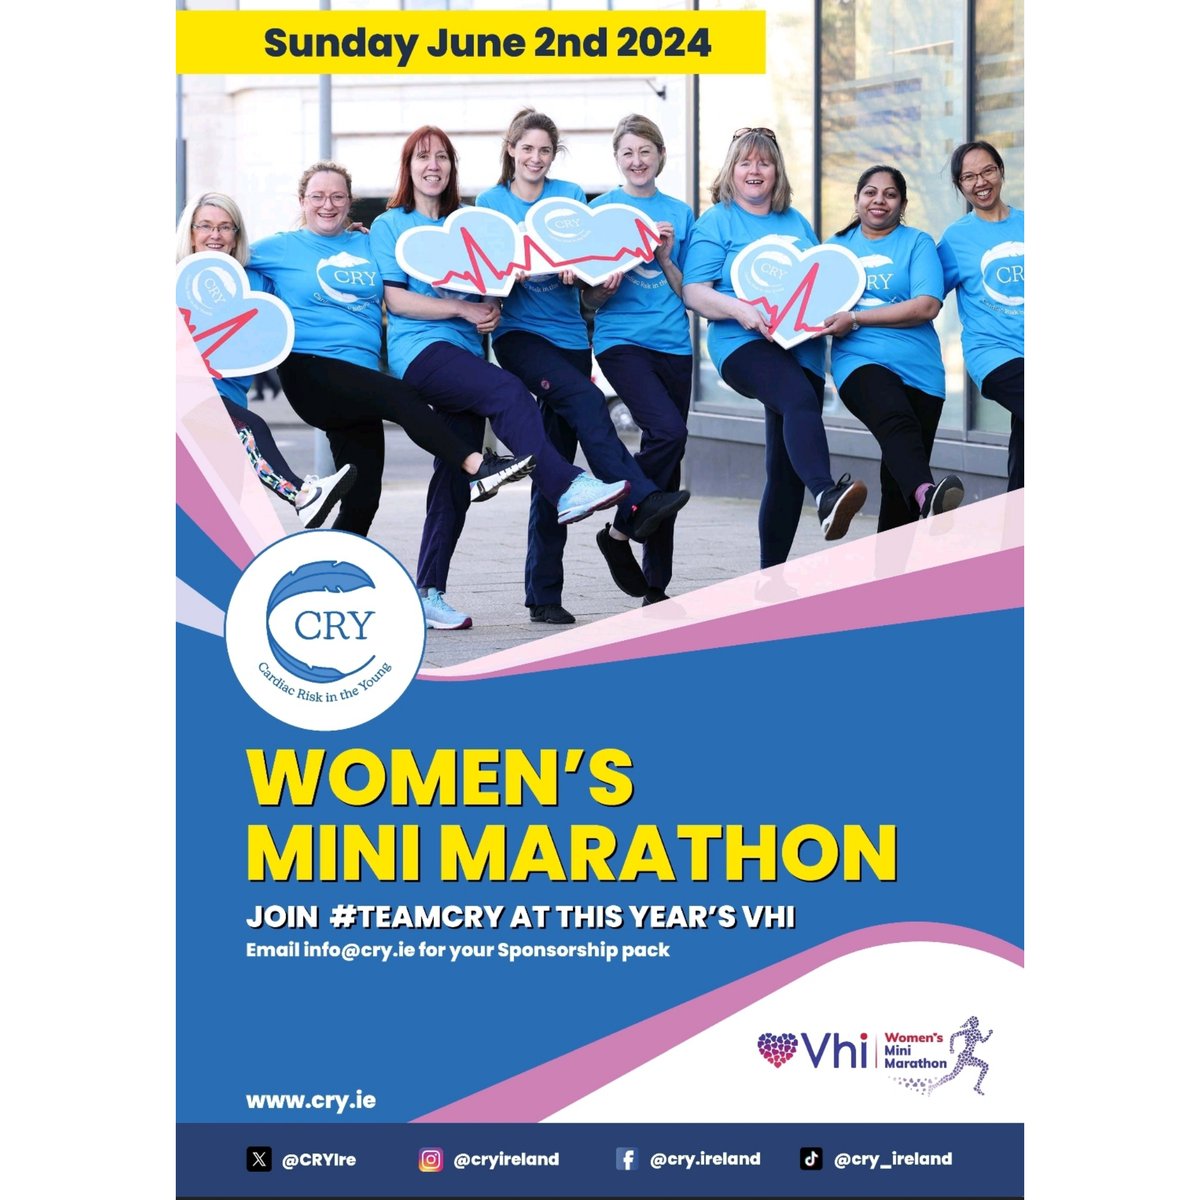 If you're taking part in the @VhiWMM please consider joining #teamCRY.

Email info@cry.ie for your #Sponsorship Pack.

#Charity #Fundraiser #Walk #Jog or #Run